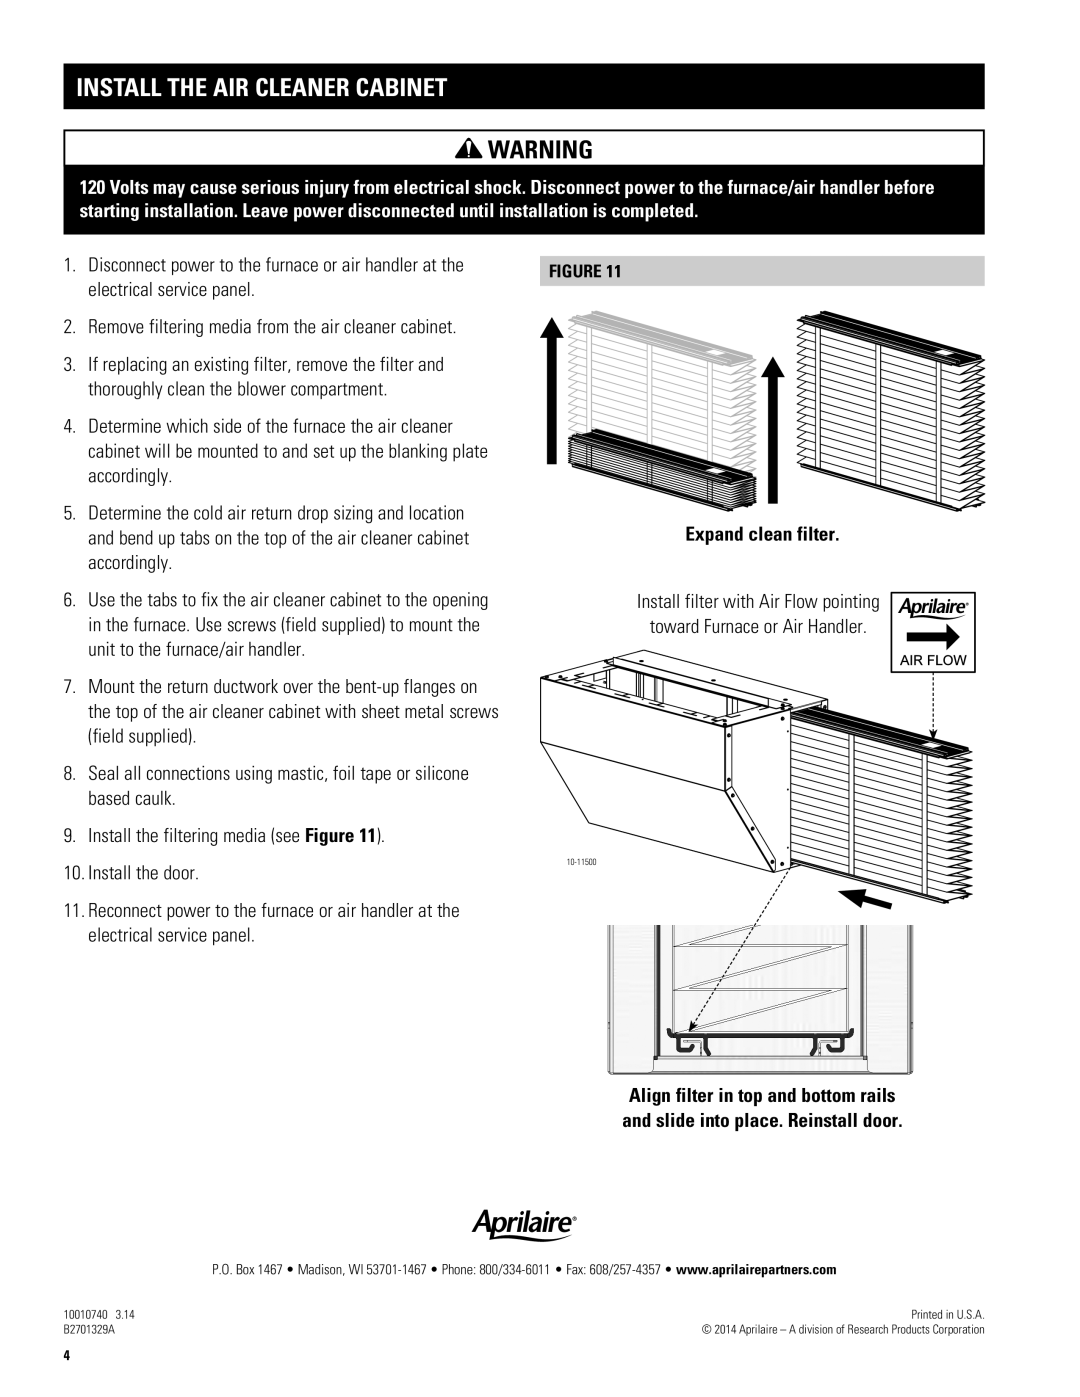 Aprilaire 1610 specifications Install The Air Cleaner Cabinet, Expand clean filter 